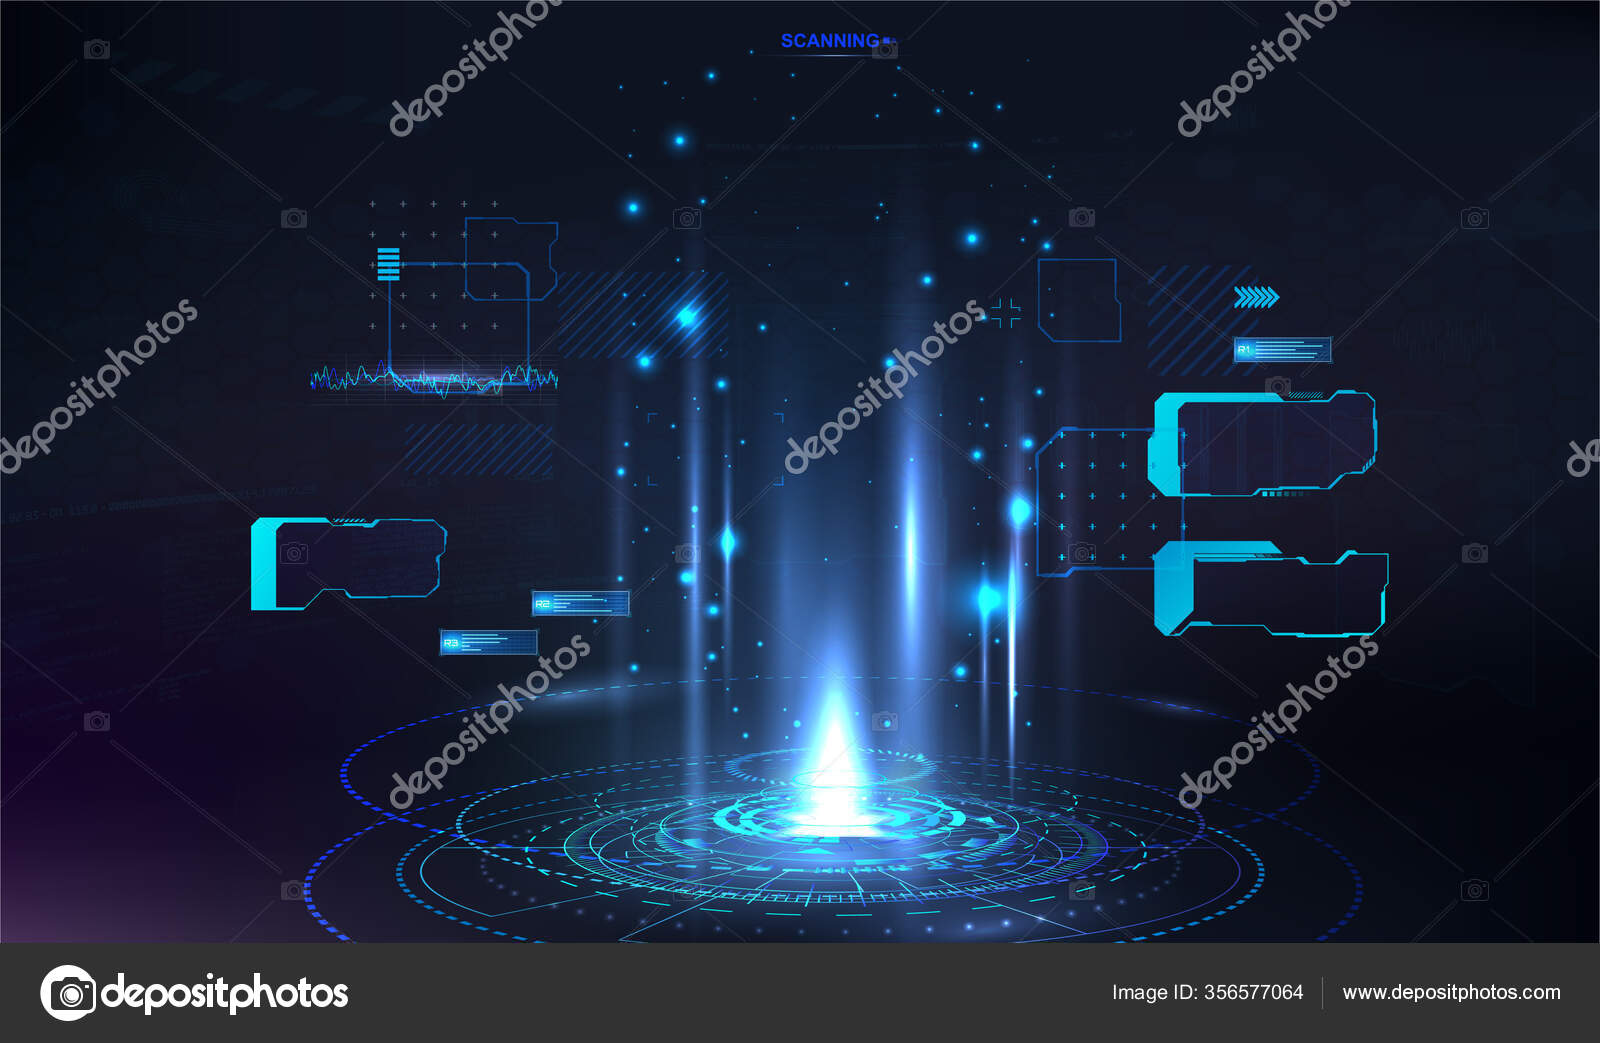 Smartphone and hologram projector 3d mockup Vector Image